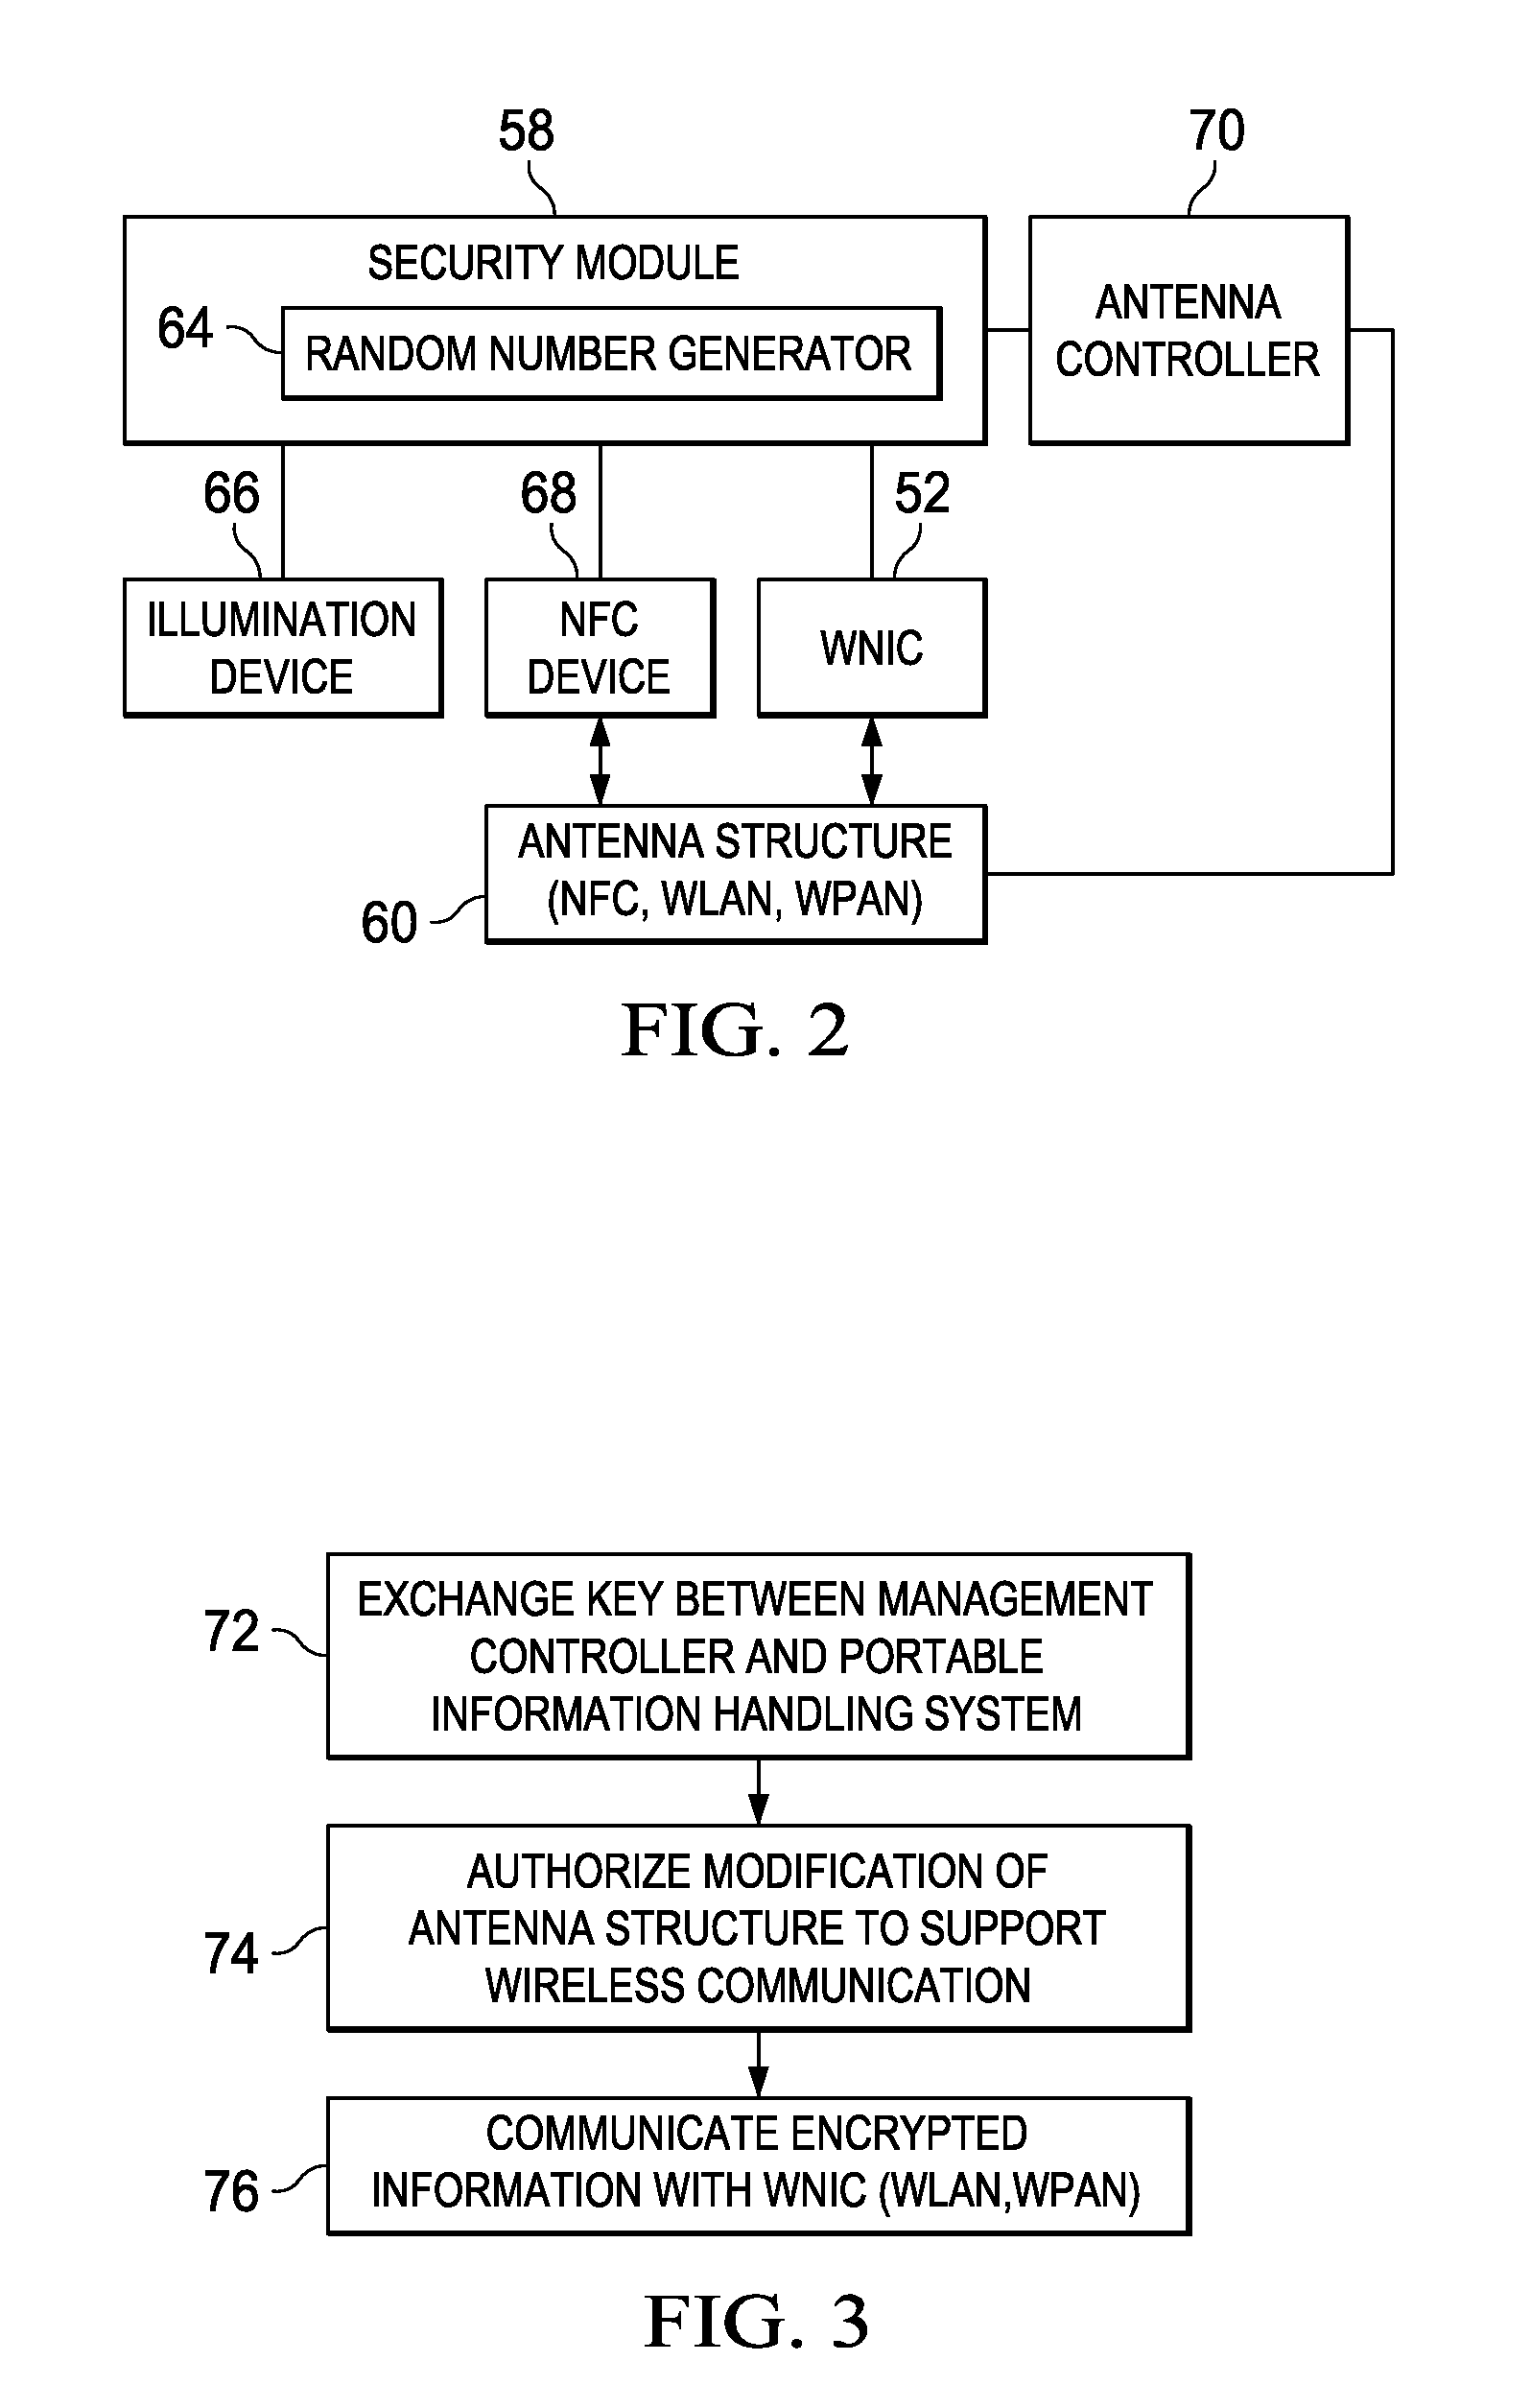 Information handling system secure RF wireless communication management with out-of-band encryption information handshake